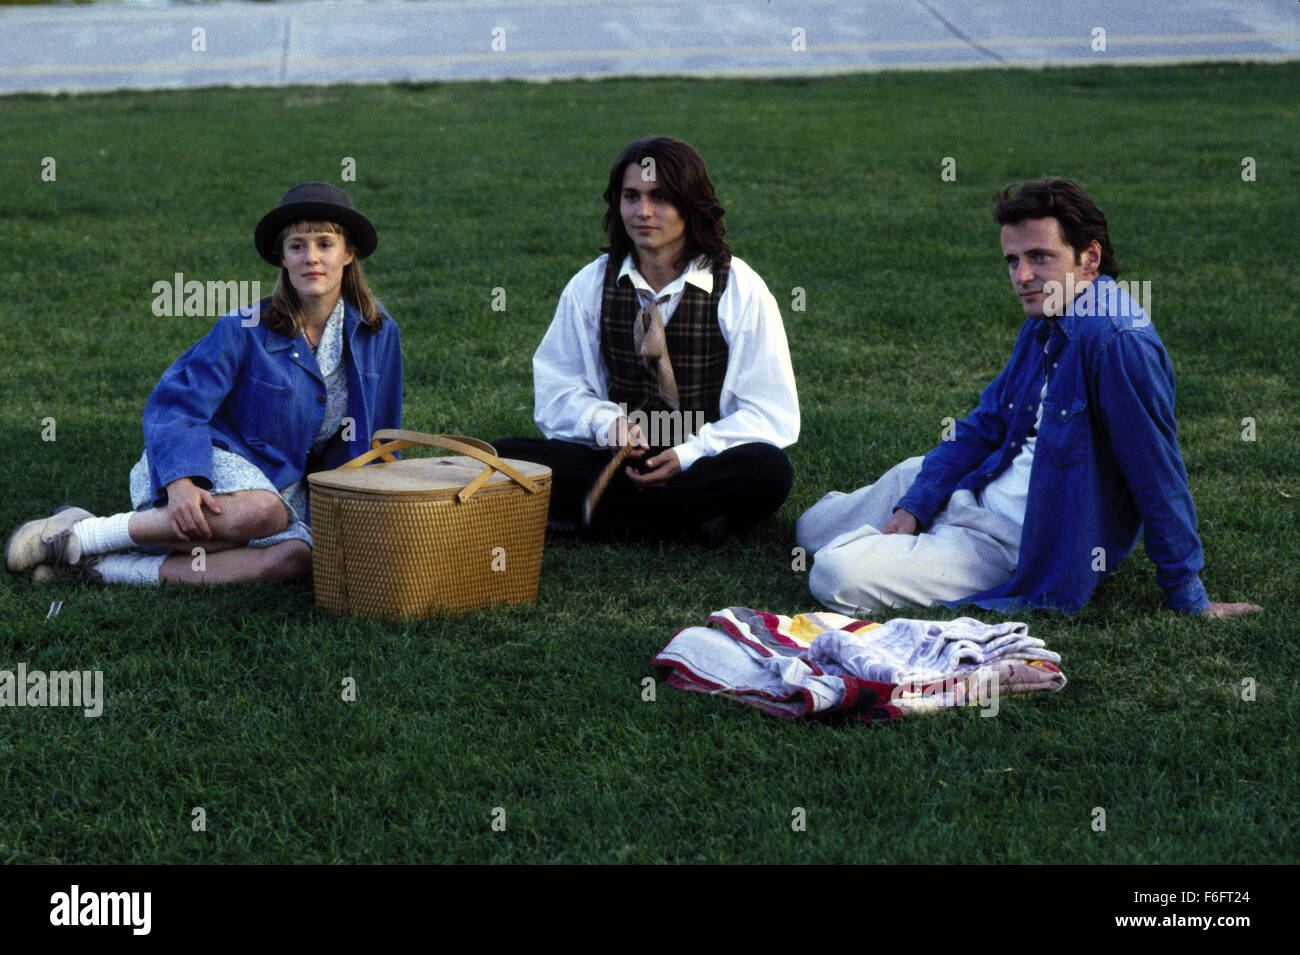 Apr 16, 1993; Spokane, WA, USA; (left to right) MARY STUART MASTERSON as Juniper 'Joon' Pearl, JOHNNY DEPP as Sam, and AIDAN QUINN as Benjamin 'Benny' Pearl in the comic, romance, drama 'Benny and Joon' directed by Jeremiah S. Chechik. Stock Photo